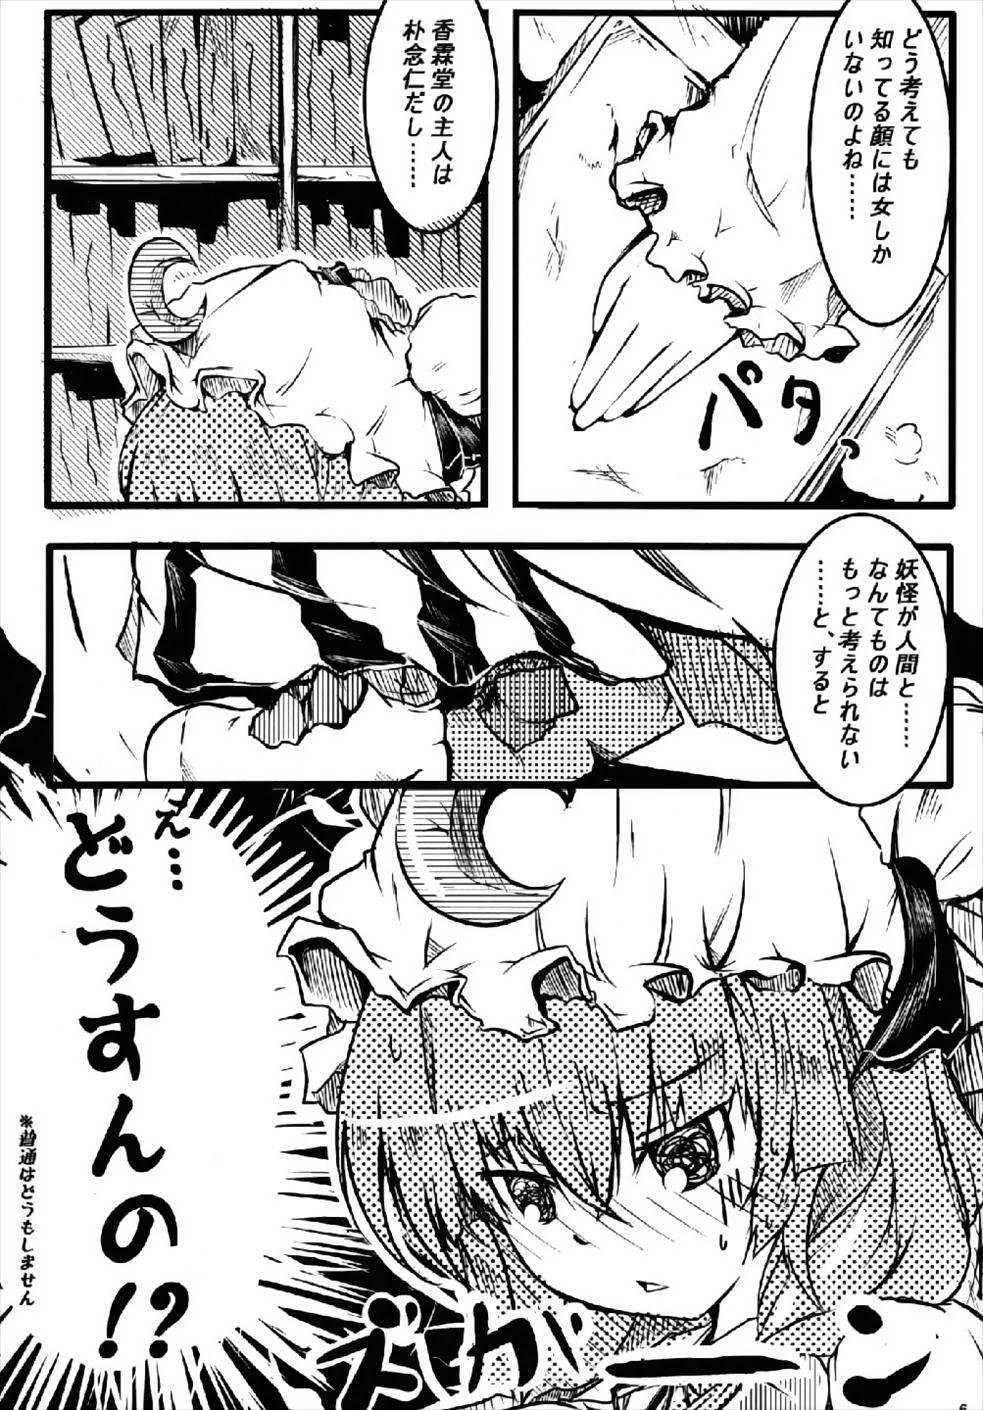 Coed RemiFlaPatche! - Touhou project Culo - Page 5